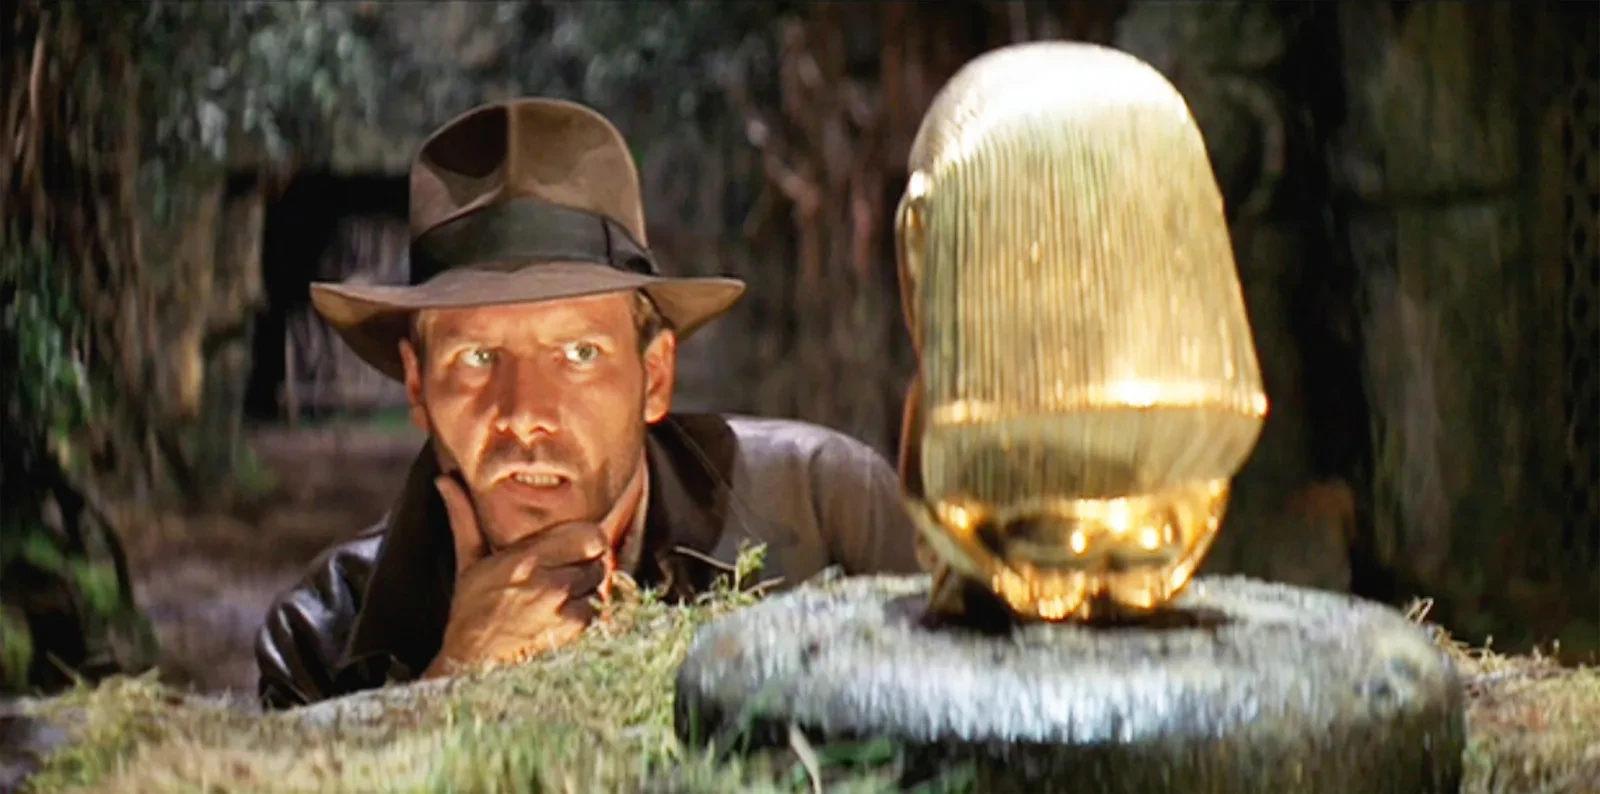 Indiana Jones replaces the Golden Idol in the Peruvian Temple in Steven Spielberg's Raider of the Lost Ark